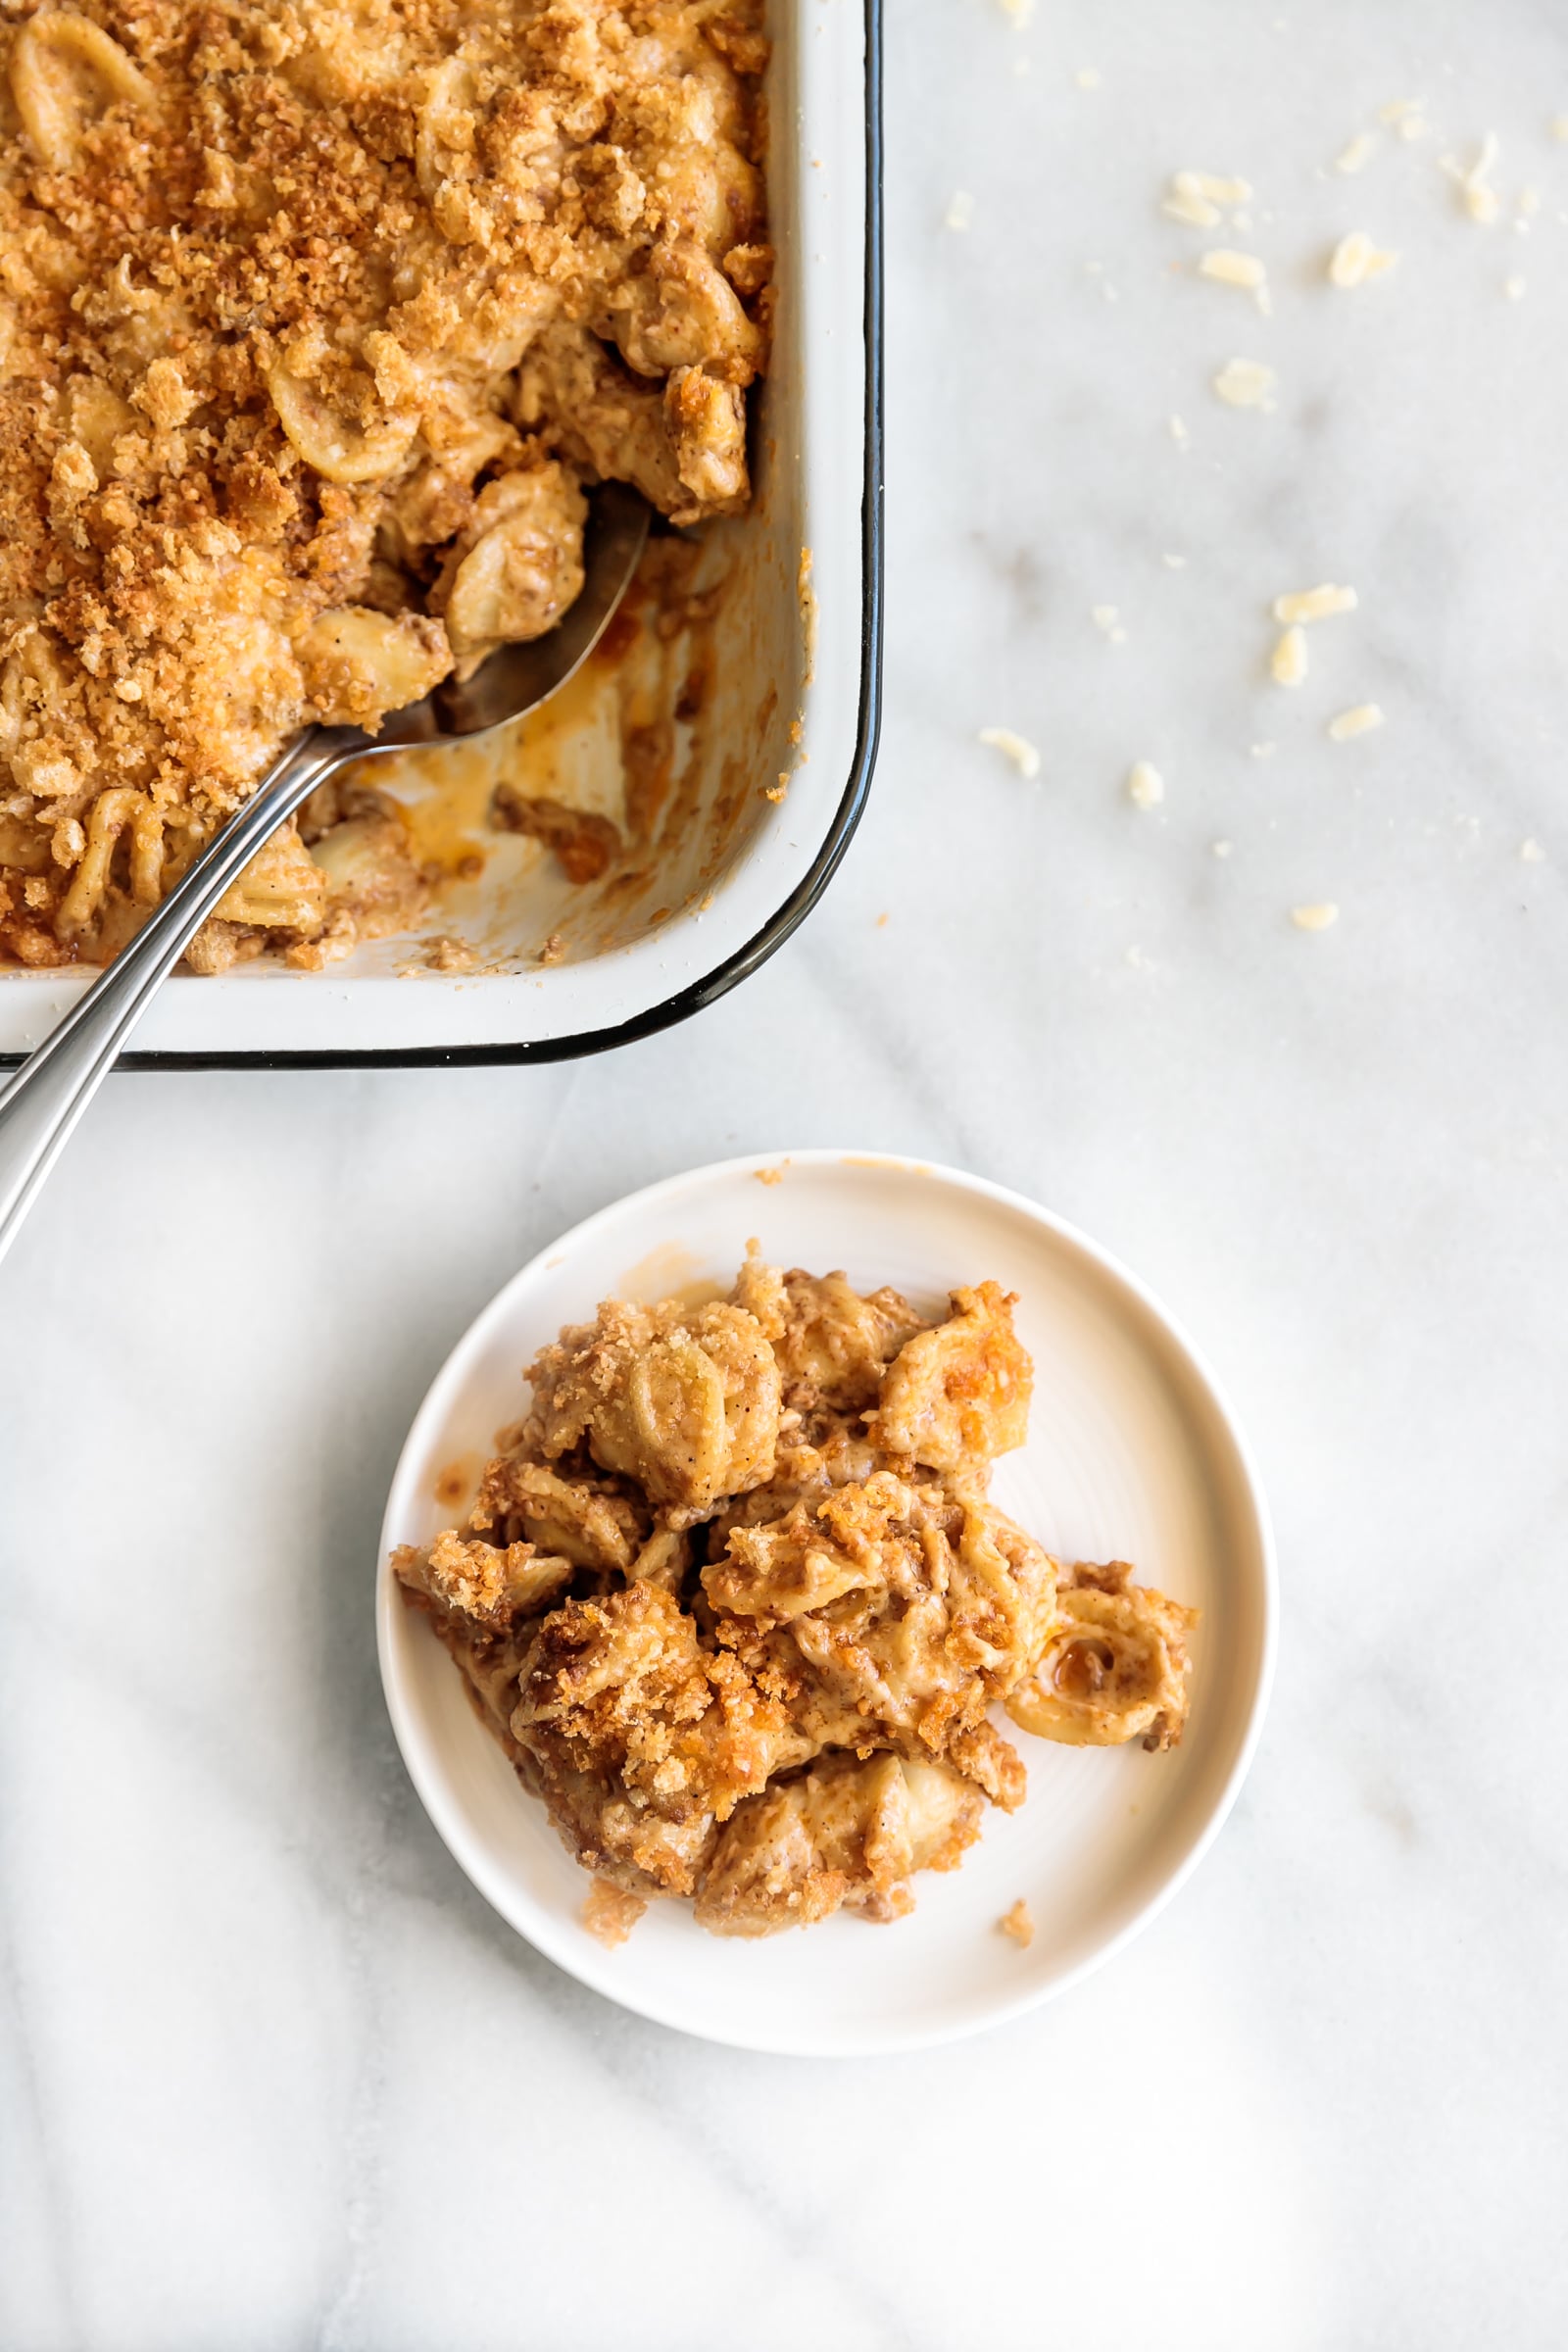 Creamy mac and cheese mixed with crumbled Mexican chorizo and a cheesy chicharrón (pork rind) crumble topping. A Latin twist on an American classic!